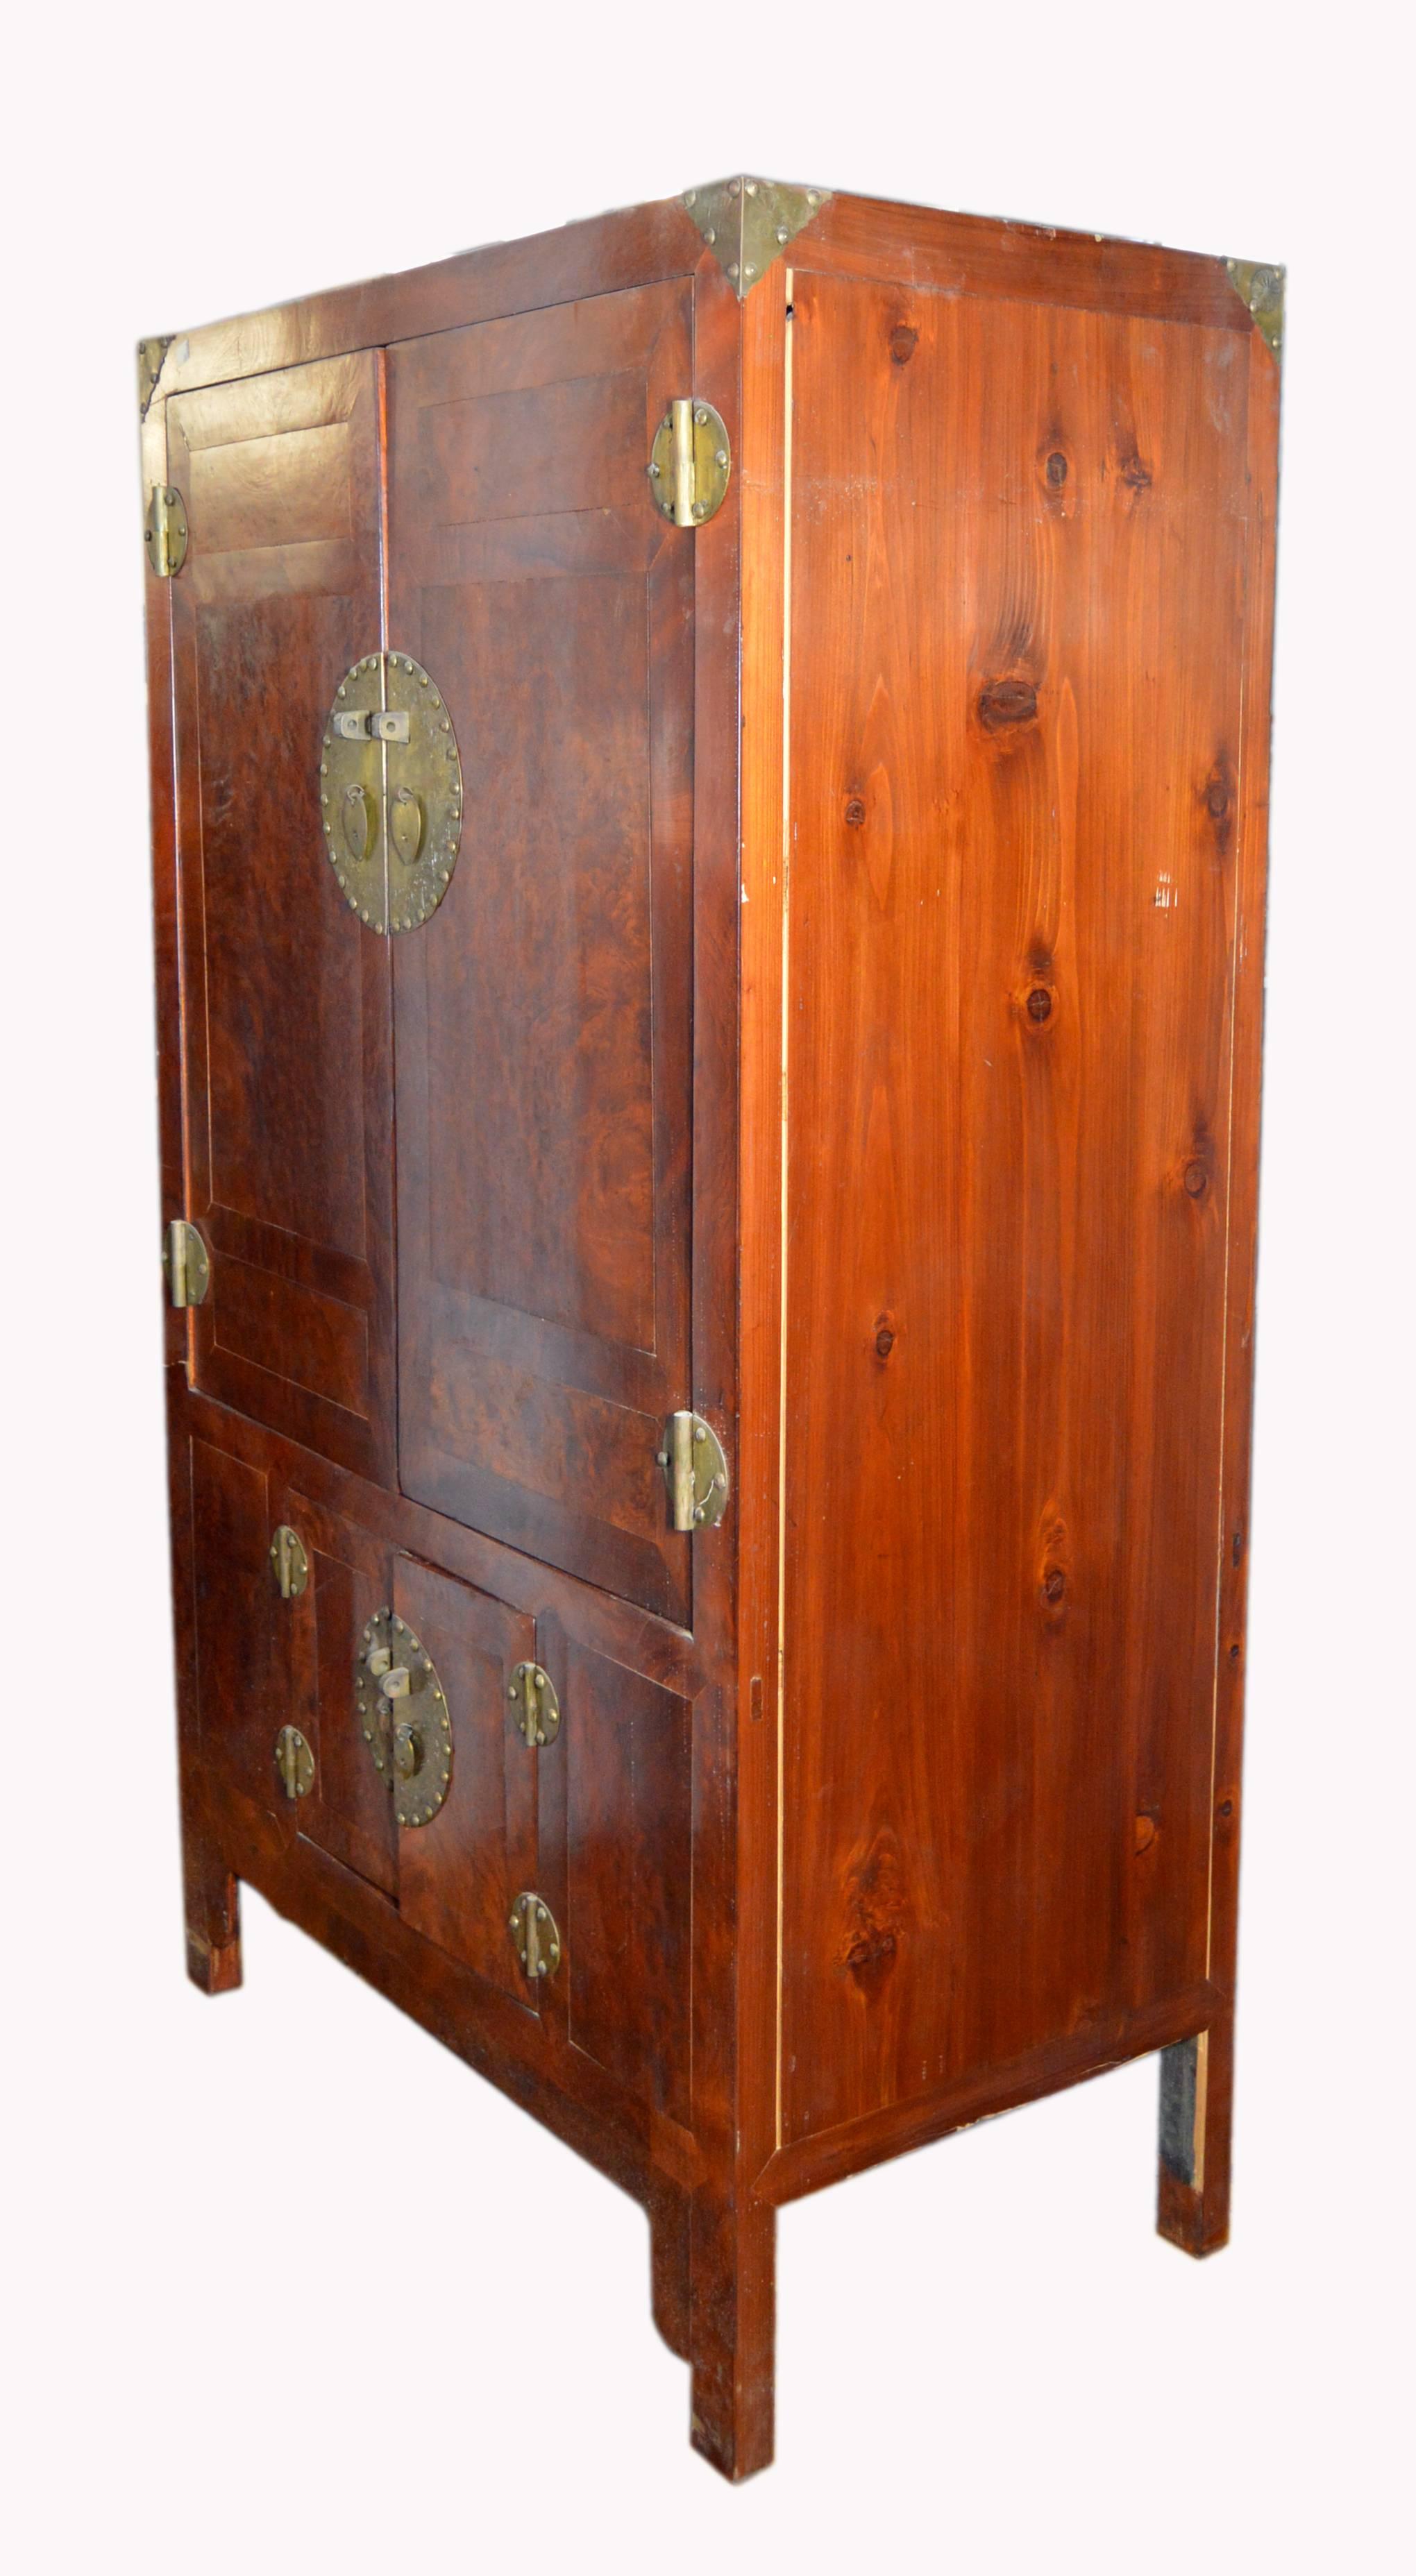 19th Century Chinese Stained Burlwood Armoire with Four Doors and Brass Hardware In Good Condition For Sale In Yonkers, NY